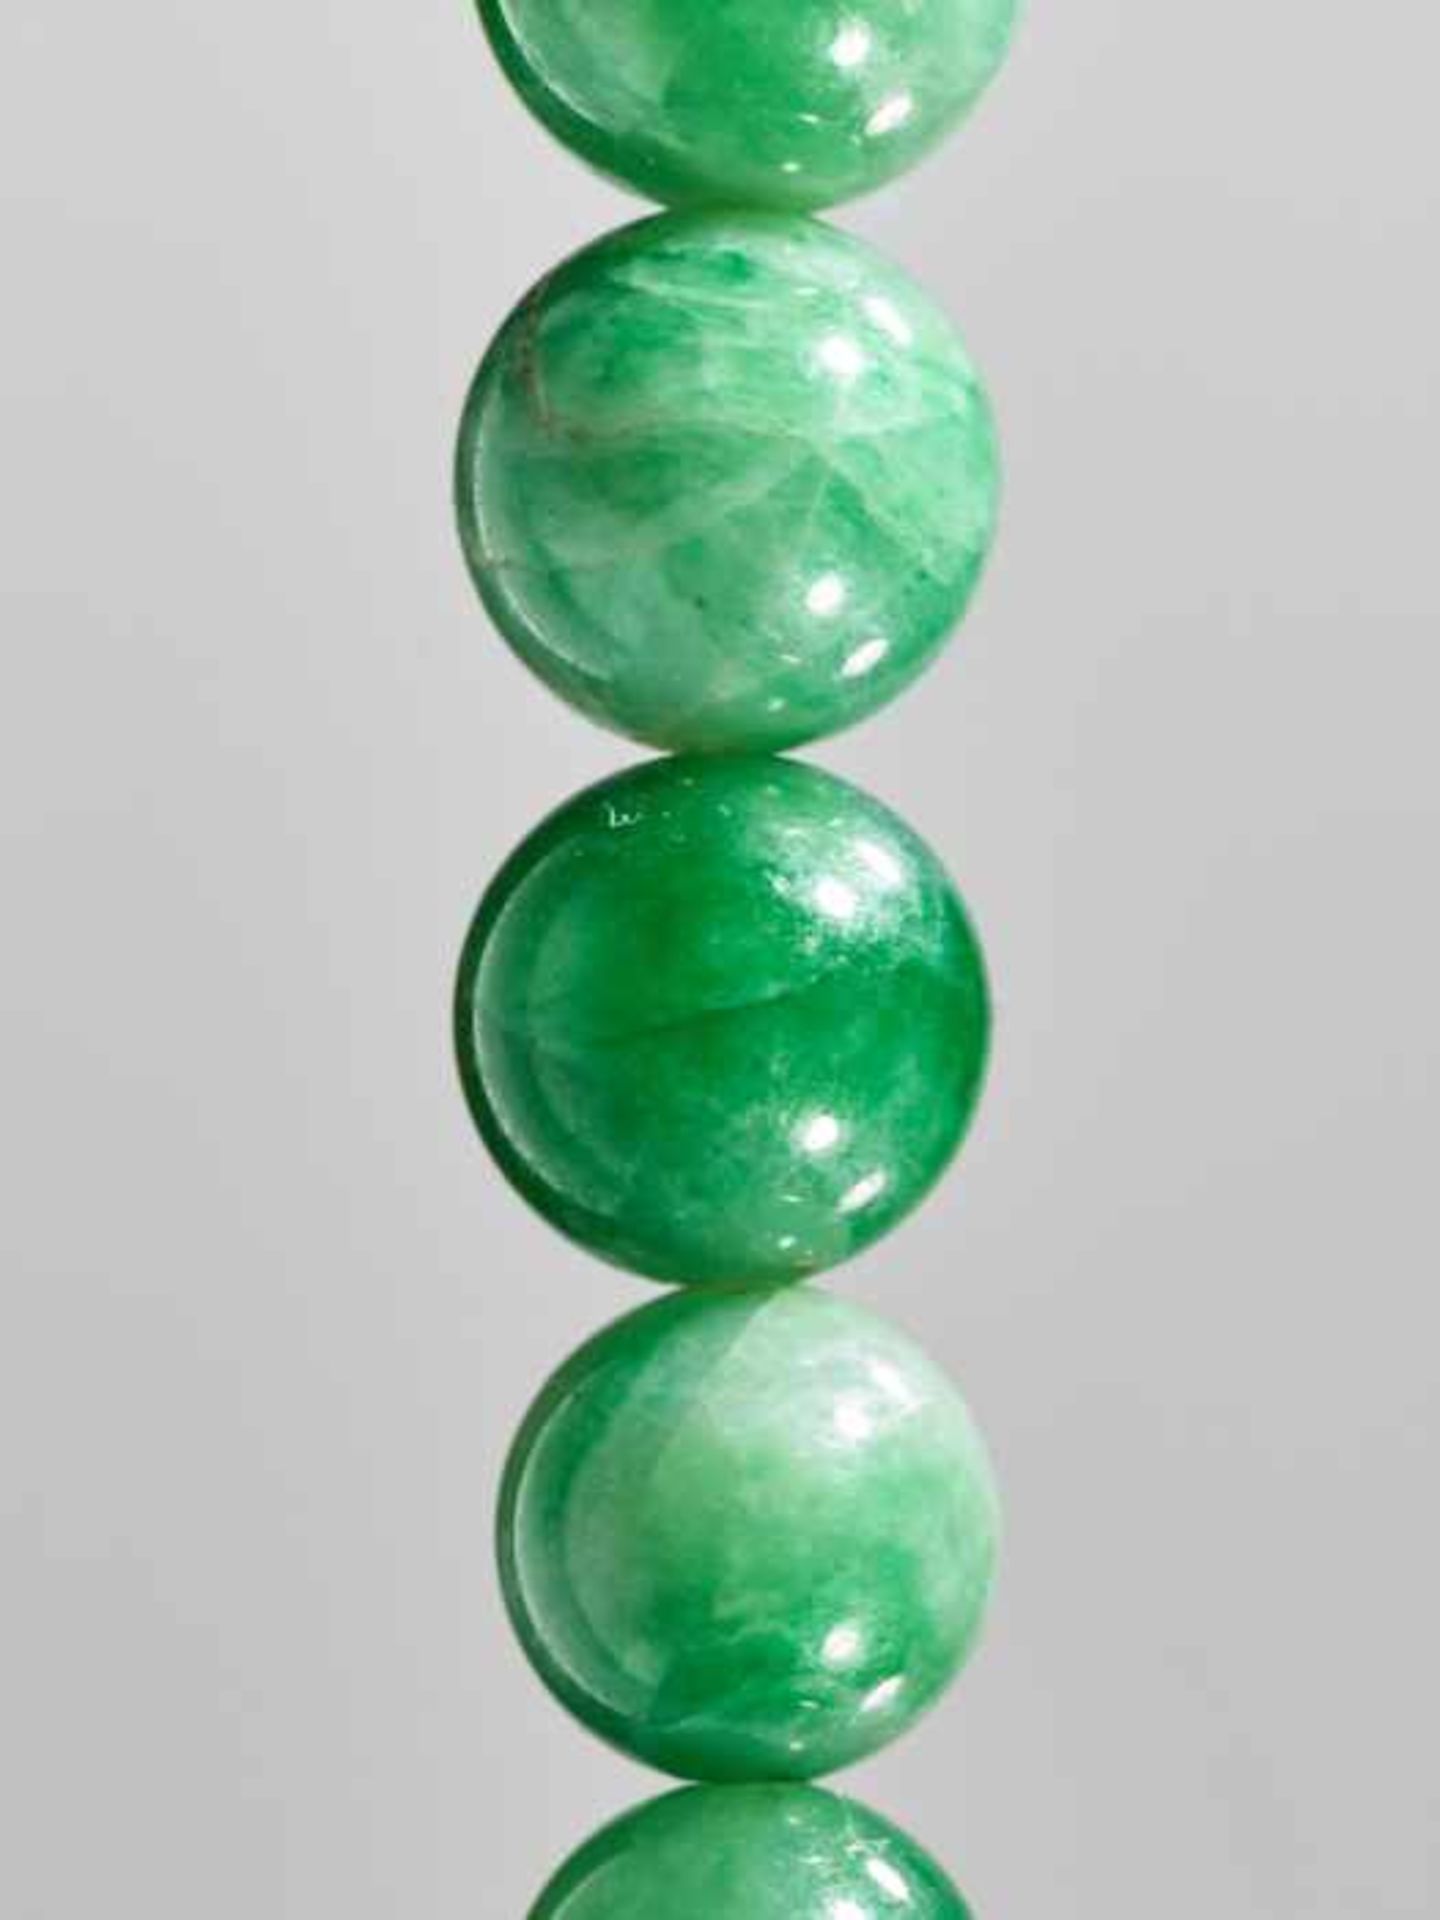 AN EMERALD GREEN JADEITE NECKLACE, 88 BEADS, WITH ORIGINAL SILVER CLASP, QING DYNASTY Emerald